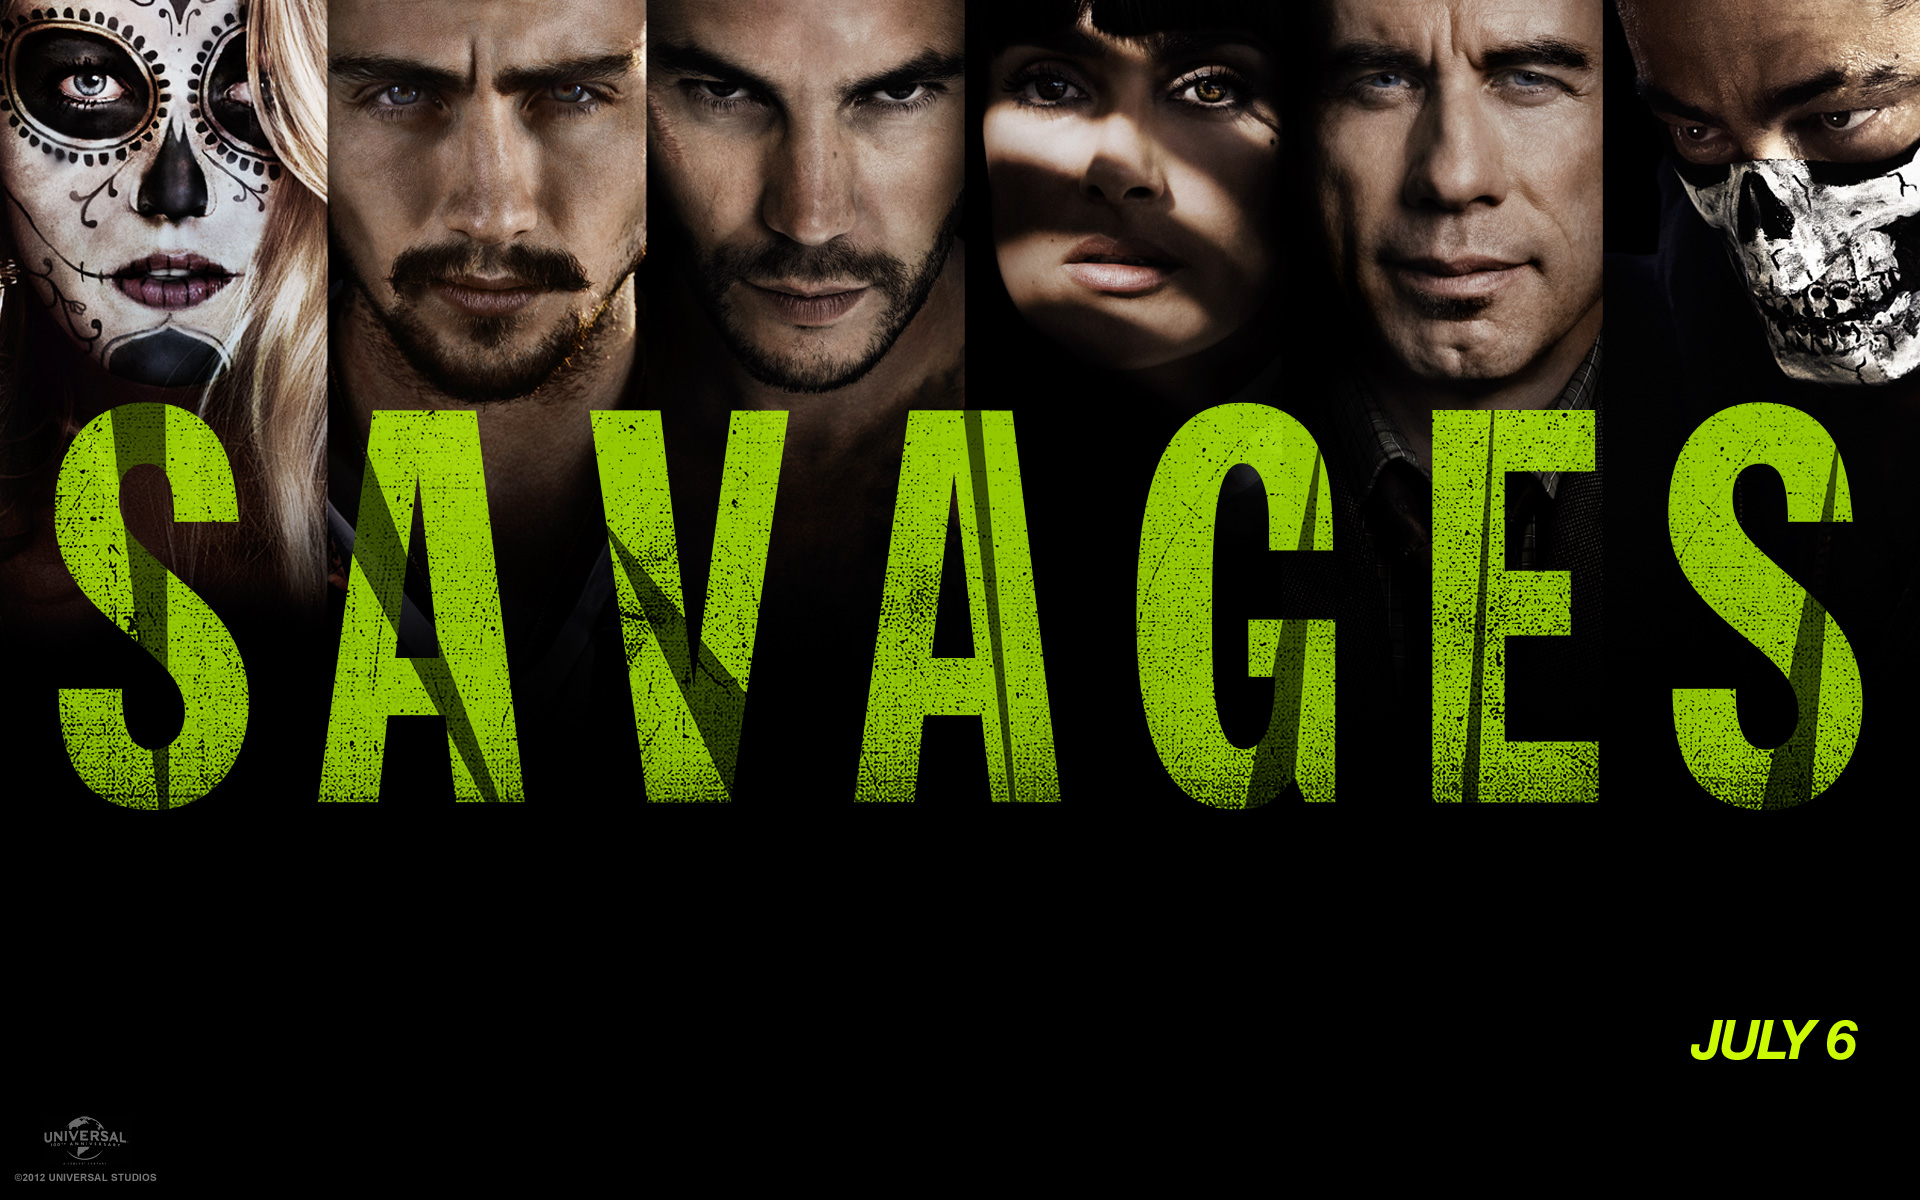 HD Wallpaper From Savages Html Movie